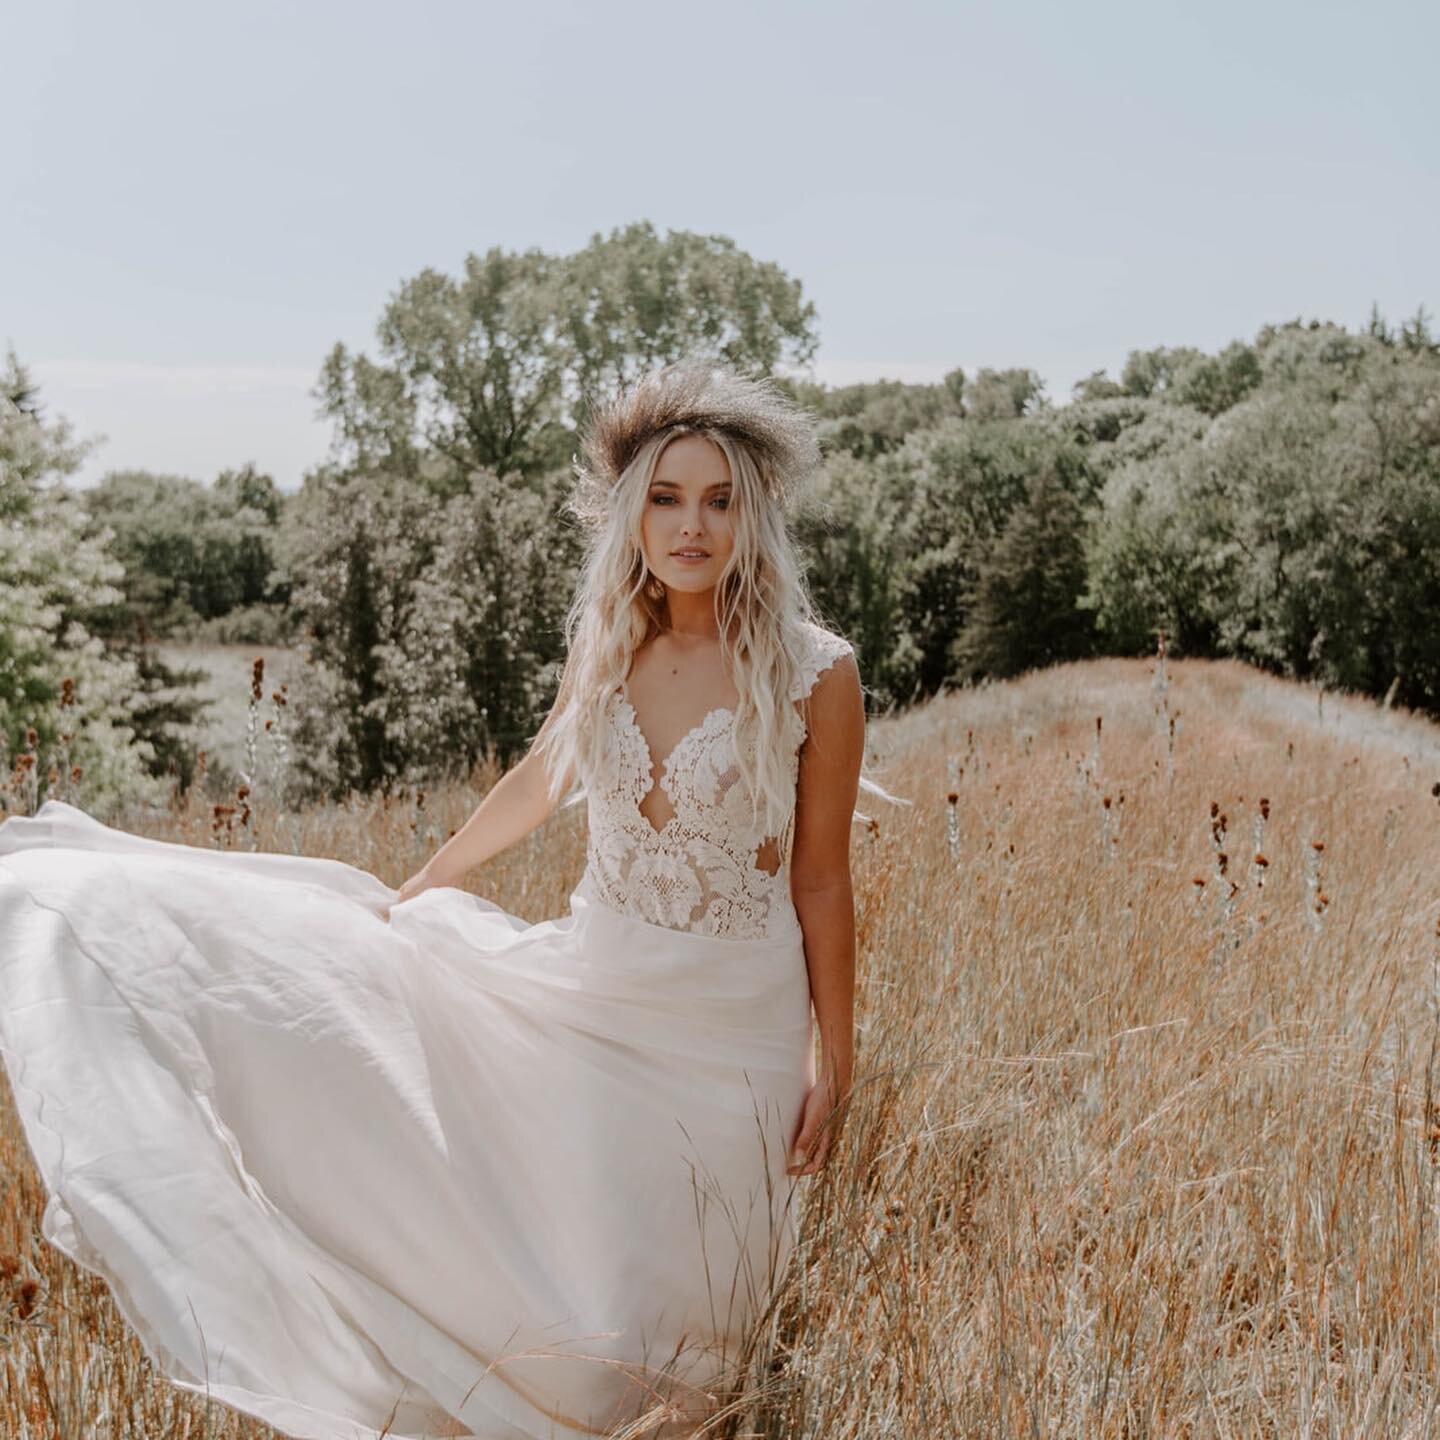 Love her, but leave her WILD.
⠀⠀⠀⠀⠀⠀⠀⠀⠀
Barefoot.  Sand between your toes, mud stains on your skirt.  Sounds like a wild time to us&hellip;
⠀⠀⠀⠀⠀⠀⠀⠀⠀
Where our wild brides at?!?! 
.
.
.
#wildbride #wildelopement #bridalseparates #loveinthewild #Wisco